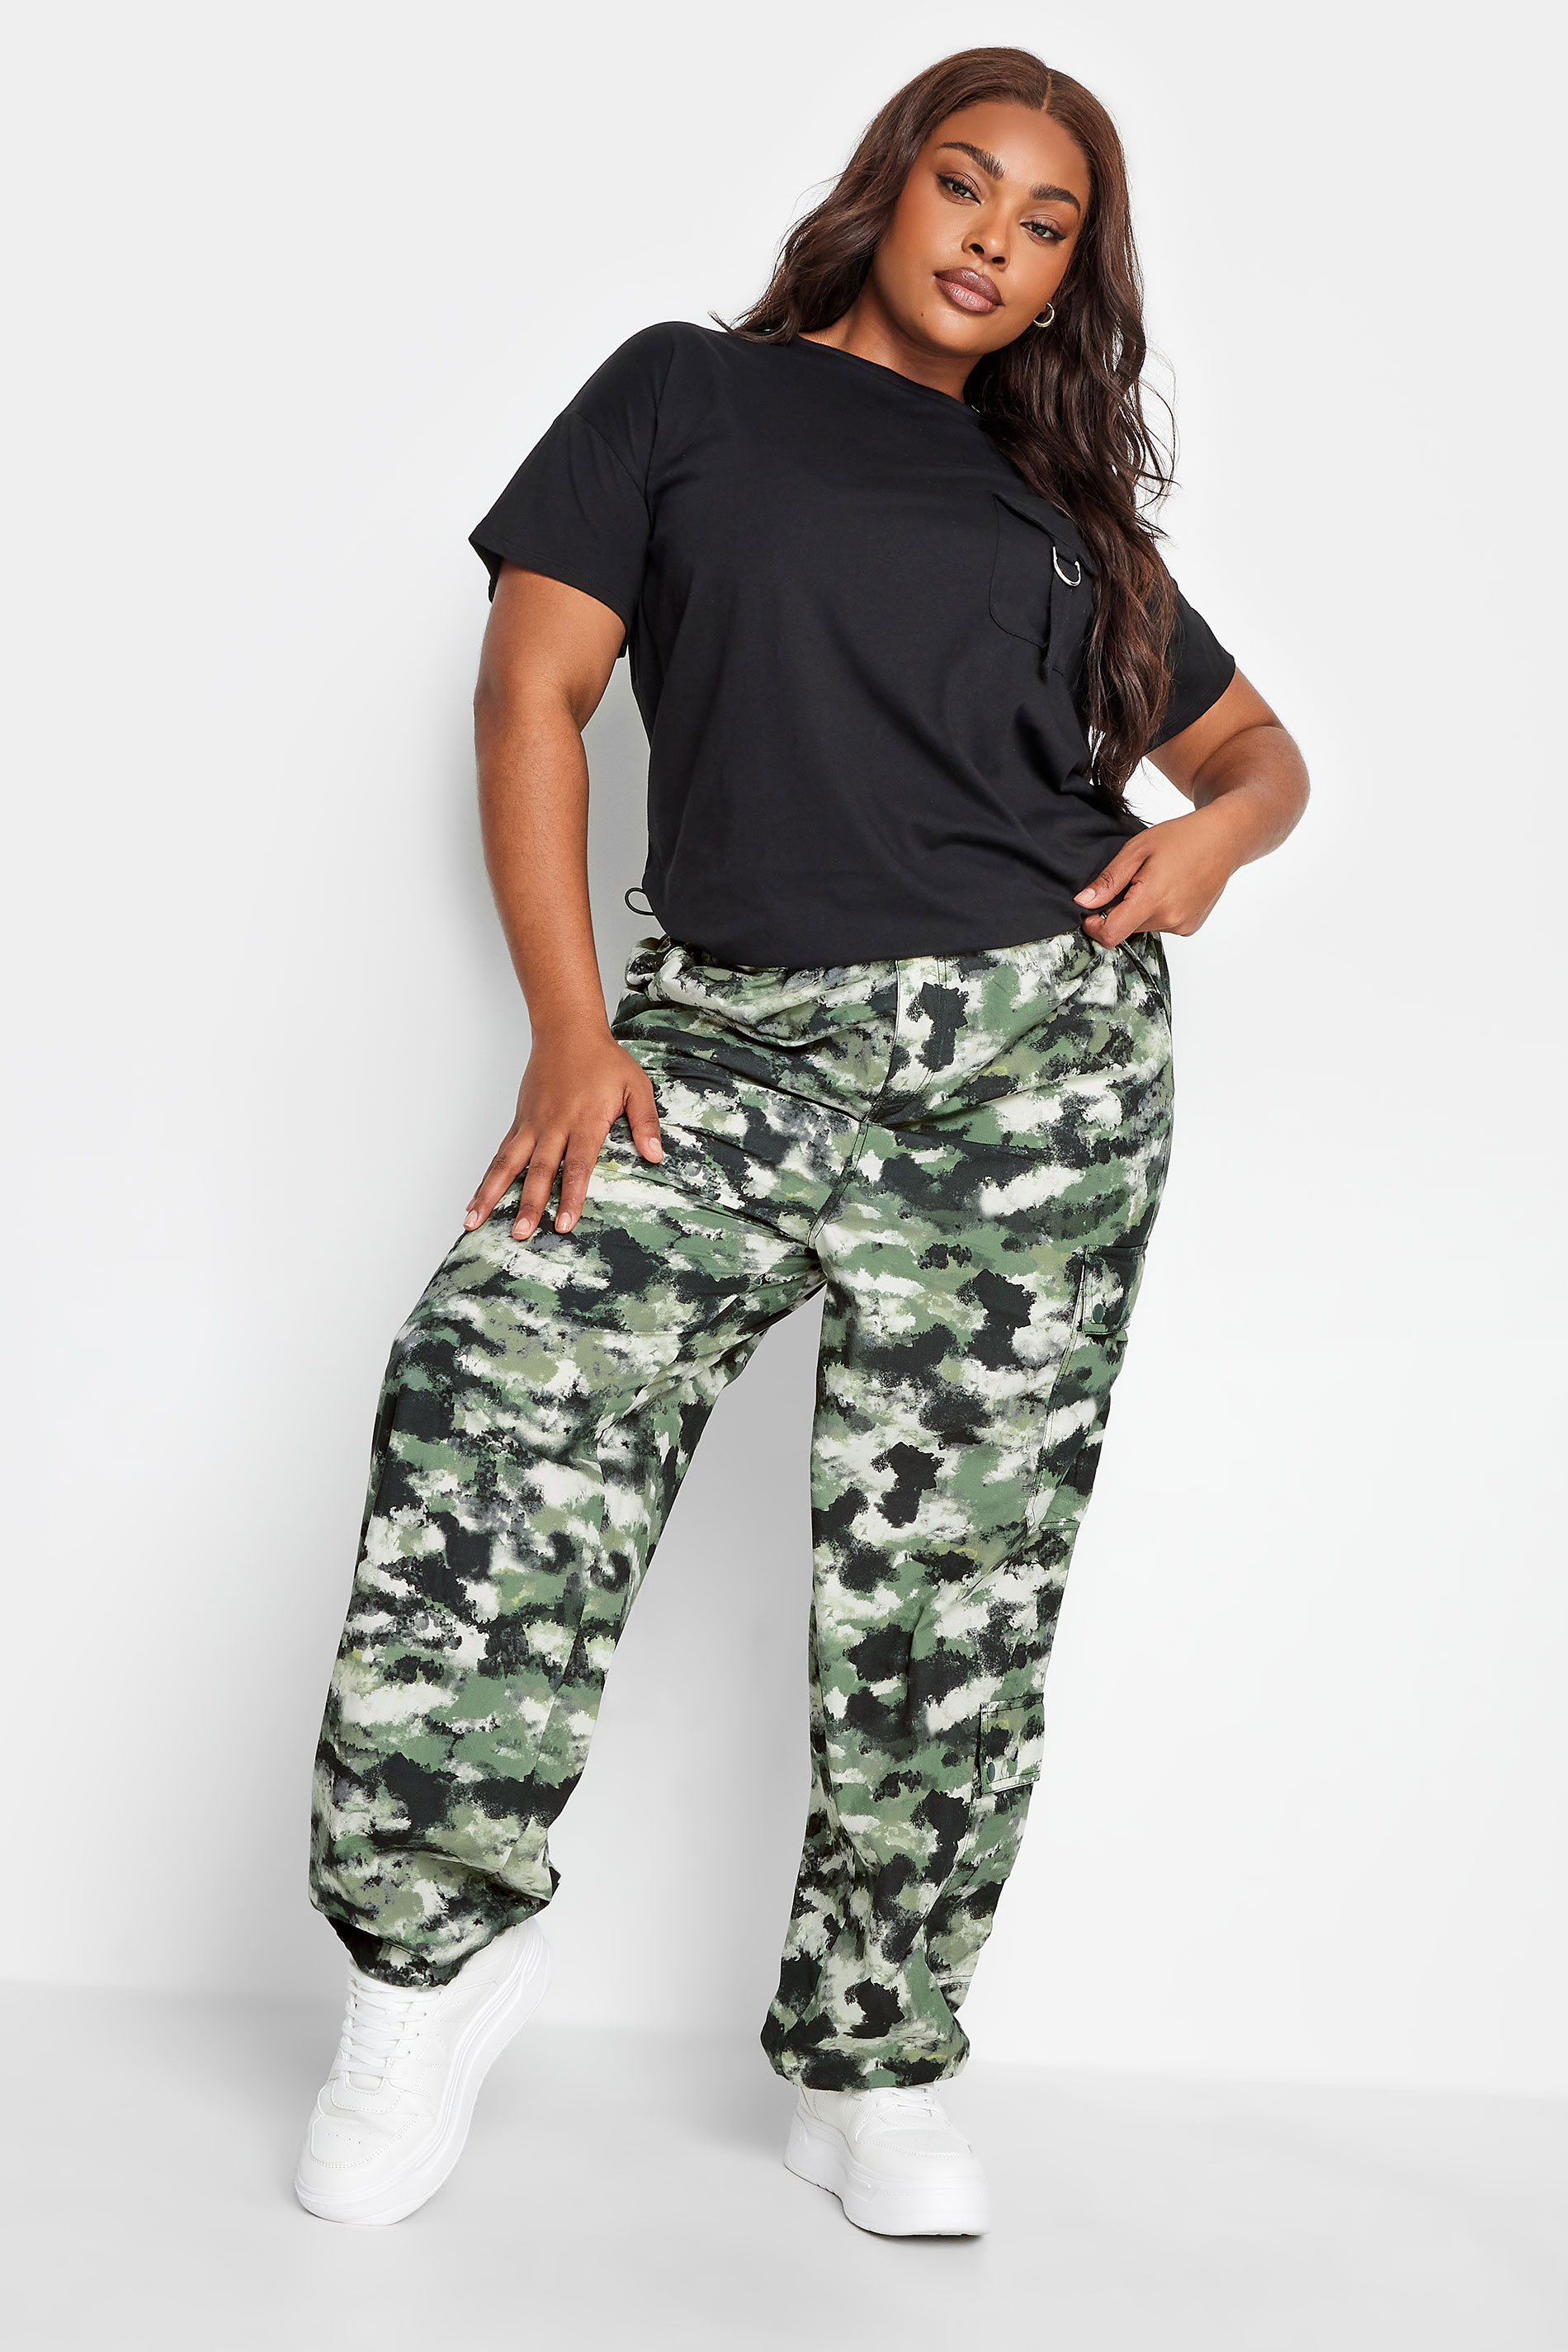 Plus size buttery soft green camouflage cargo leggings/joggers with po – A  & R's Array of Fashion